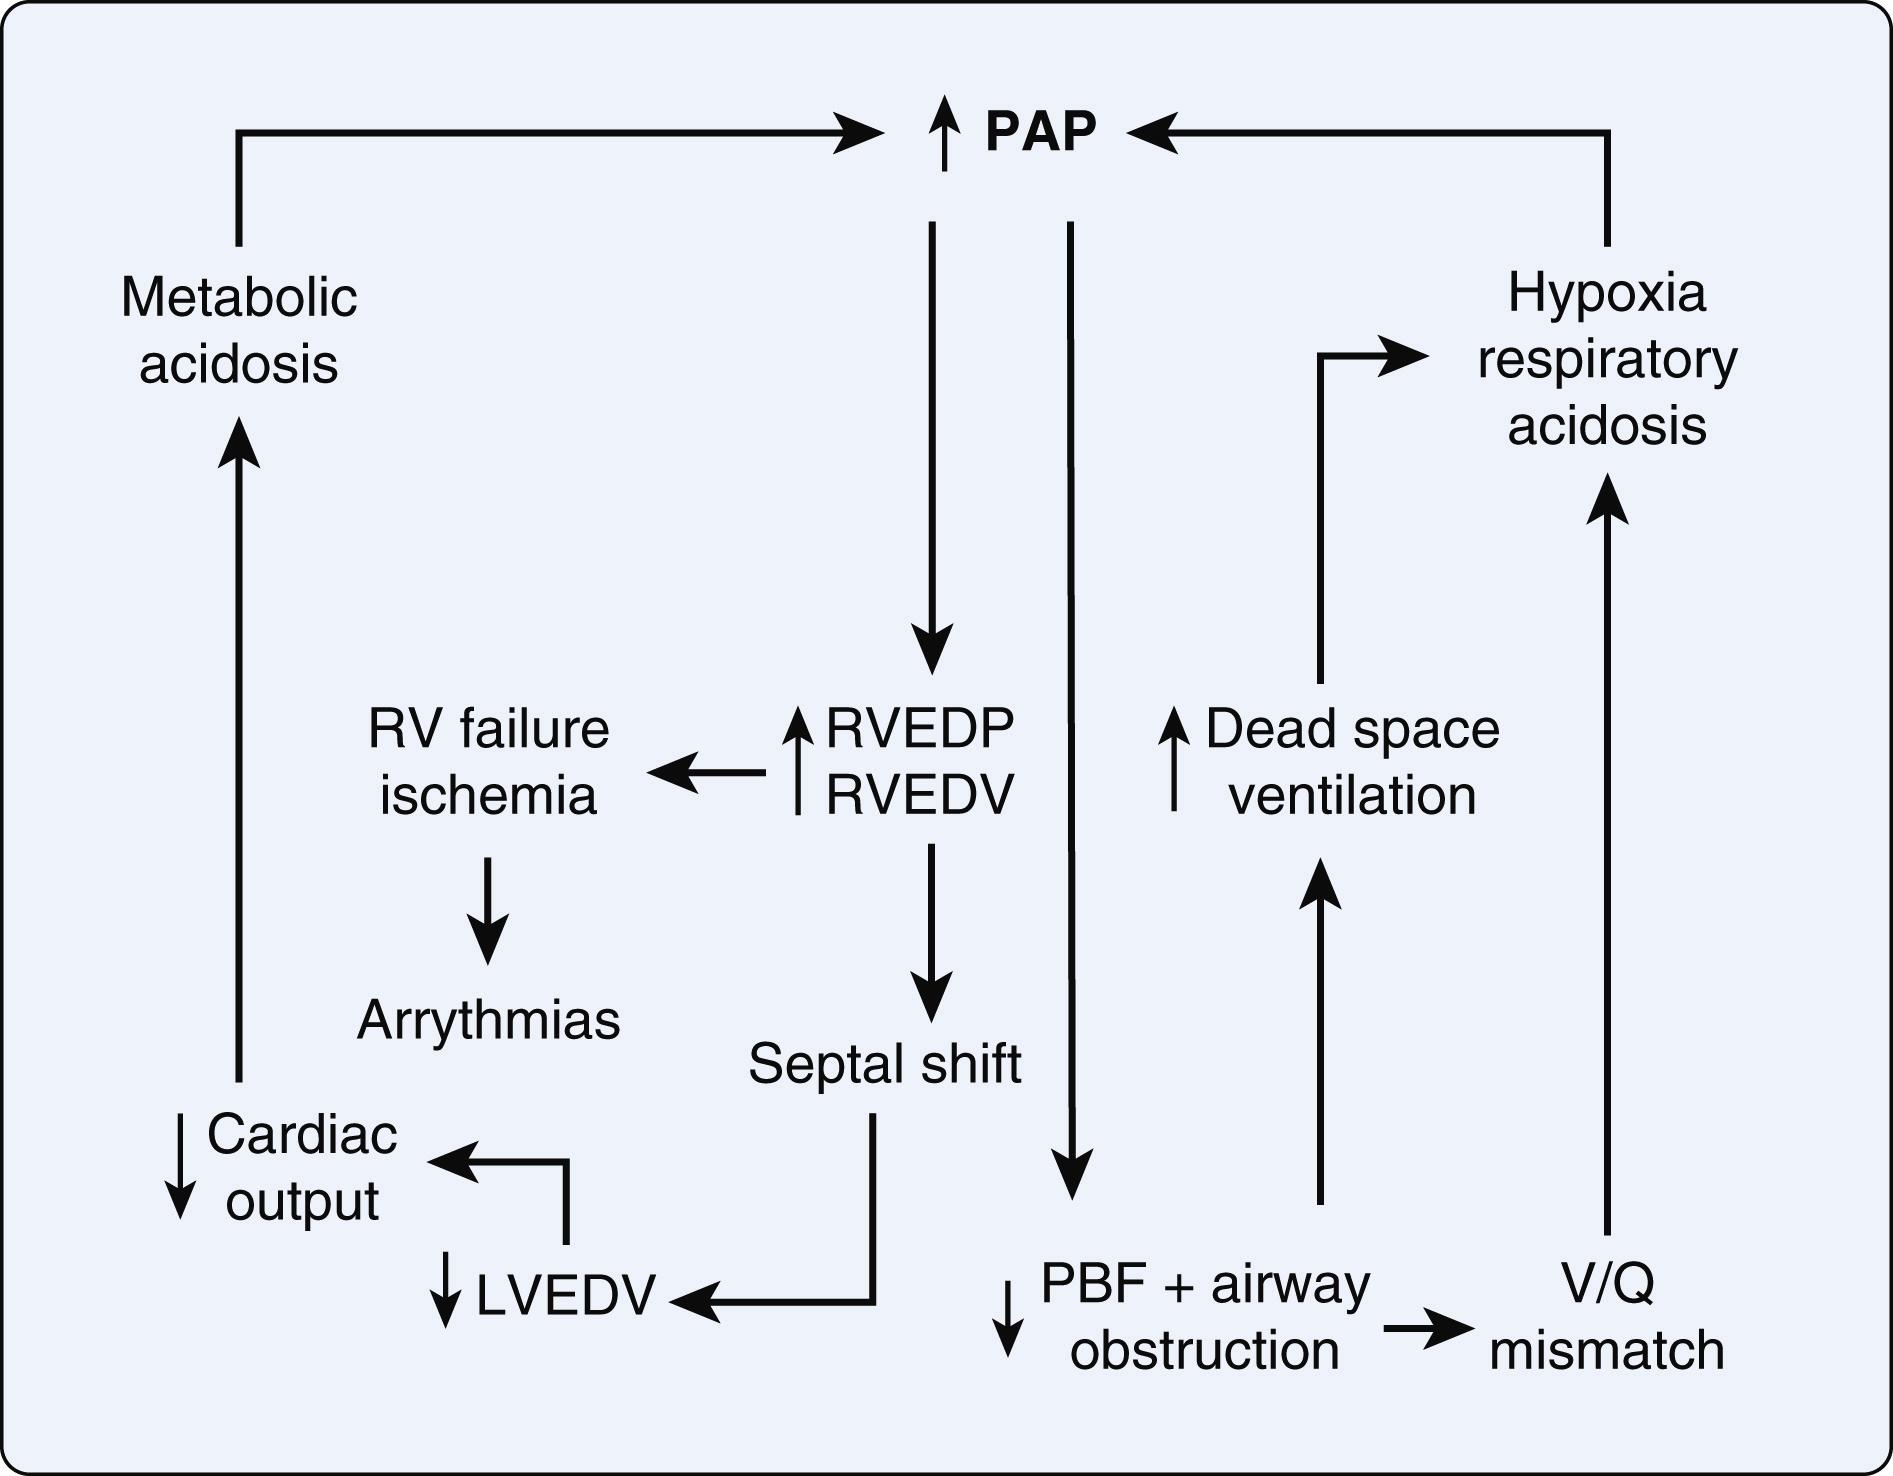 Figure 16.3, Depiction of cycle of events associated with pulmonary gas exchange abnormalities and cardiovascular collapse during a pulmonary hypertensive crisis. Not shown here is the reduction in systemic blood pressure that exacerbates RV ischemia. LVEDV , Left ventricular end-diastolic volume; PAP , pulmonary artery pressure.; PBF , pulmonary blood flow; RV , right ventricle; RVEDP , right ventricular end-diastolic pressure; RVEDV , right ventricular end-diastolic volume; V/Q , Ventilation/perfusion.